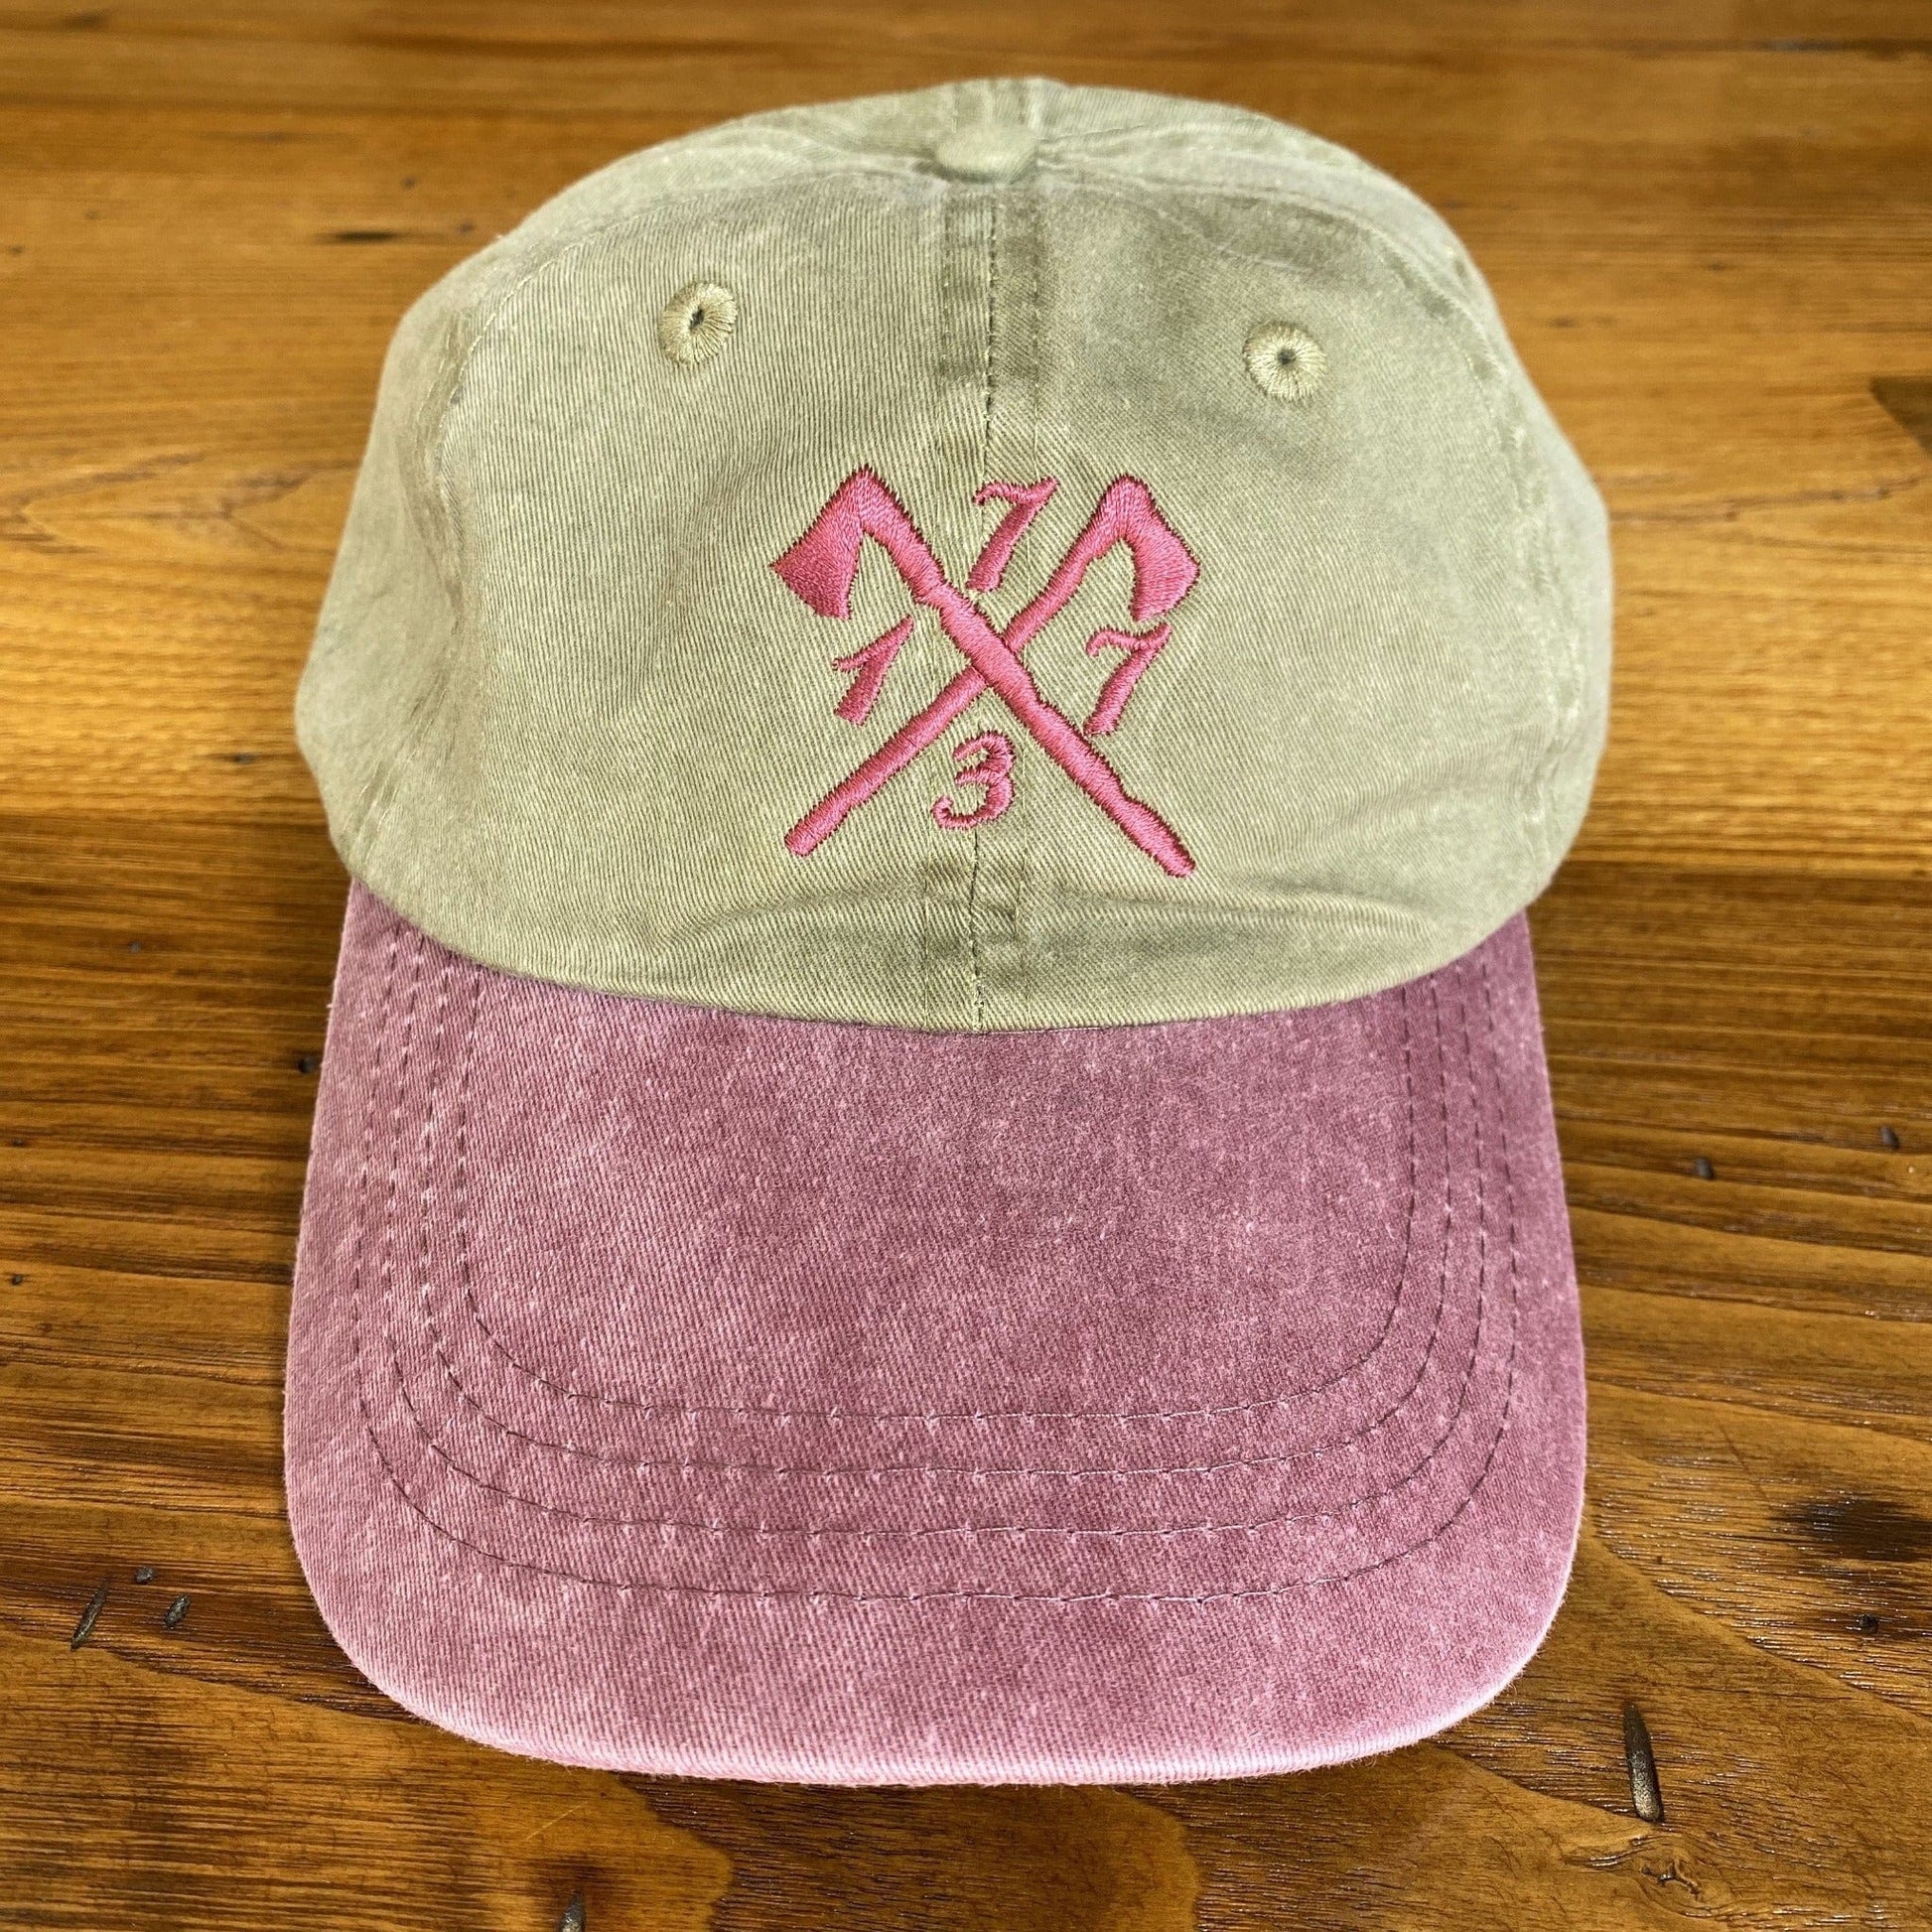 Embroidered "1773" Boston Tea Party Two-tone cap - Khaki/Maroon from The History List Store